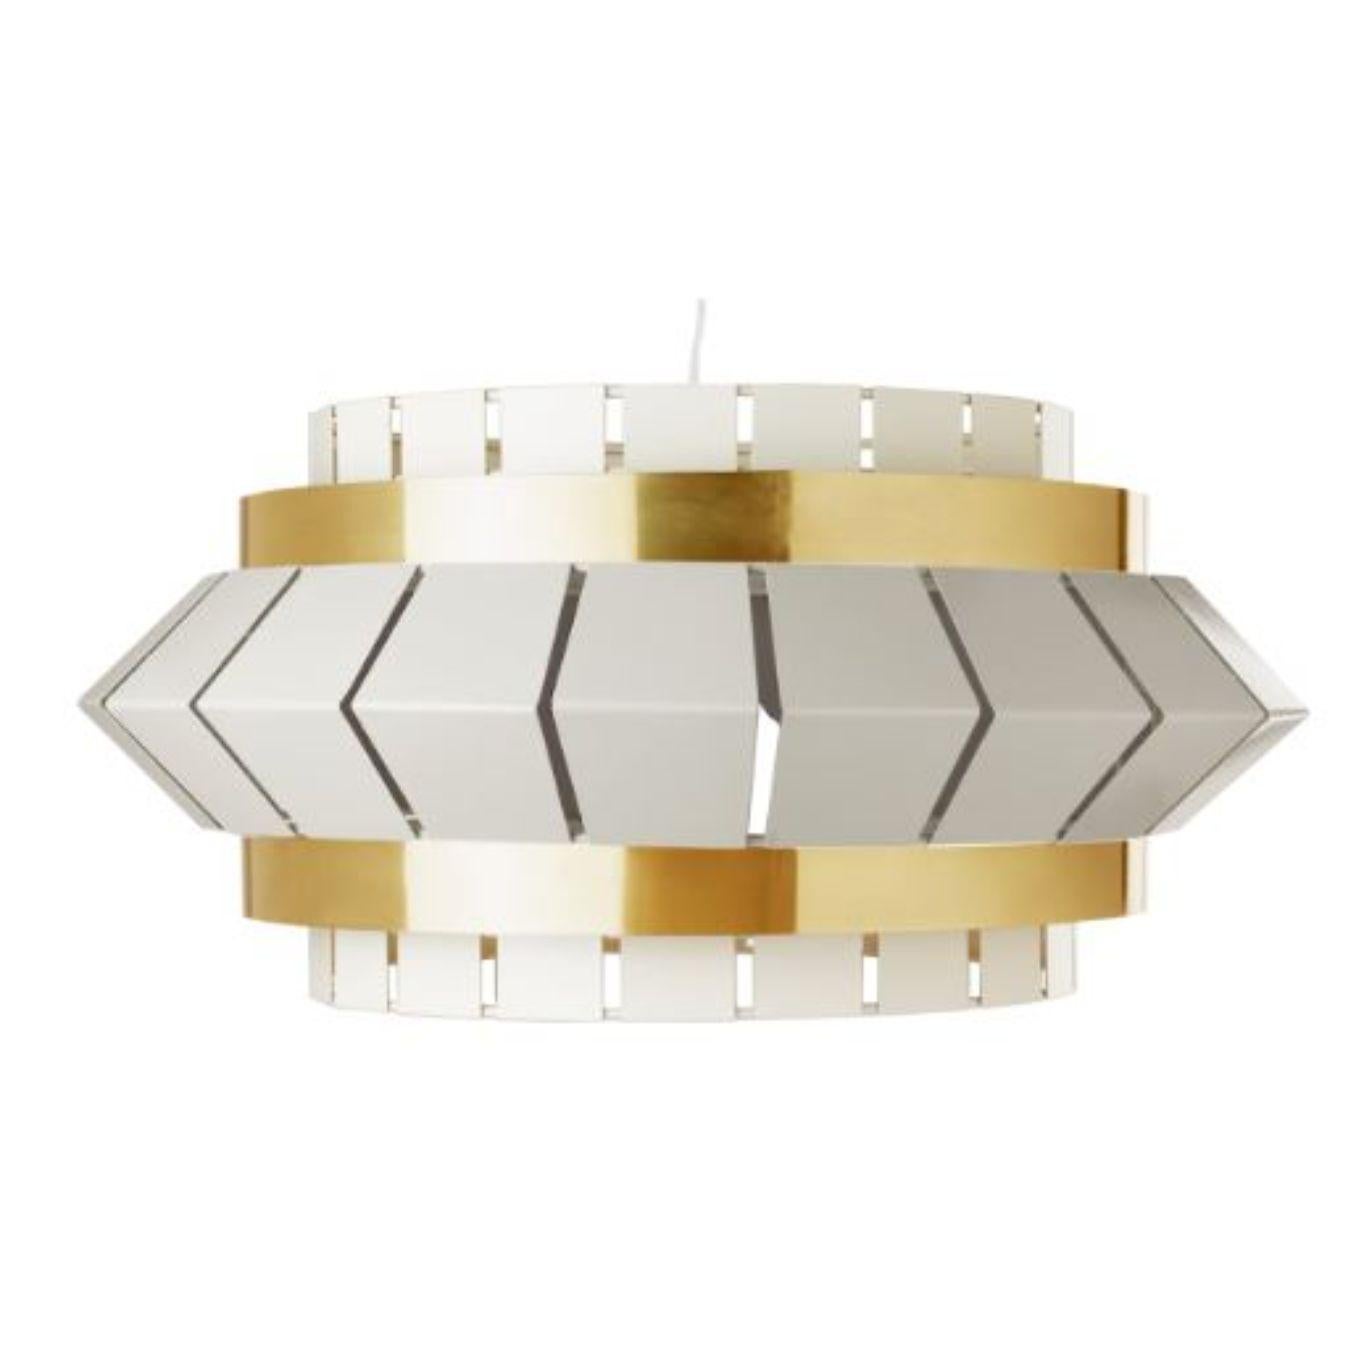 Contemporary Taupe Comb I Suspension Lamp by Dooq For Sale